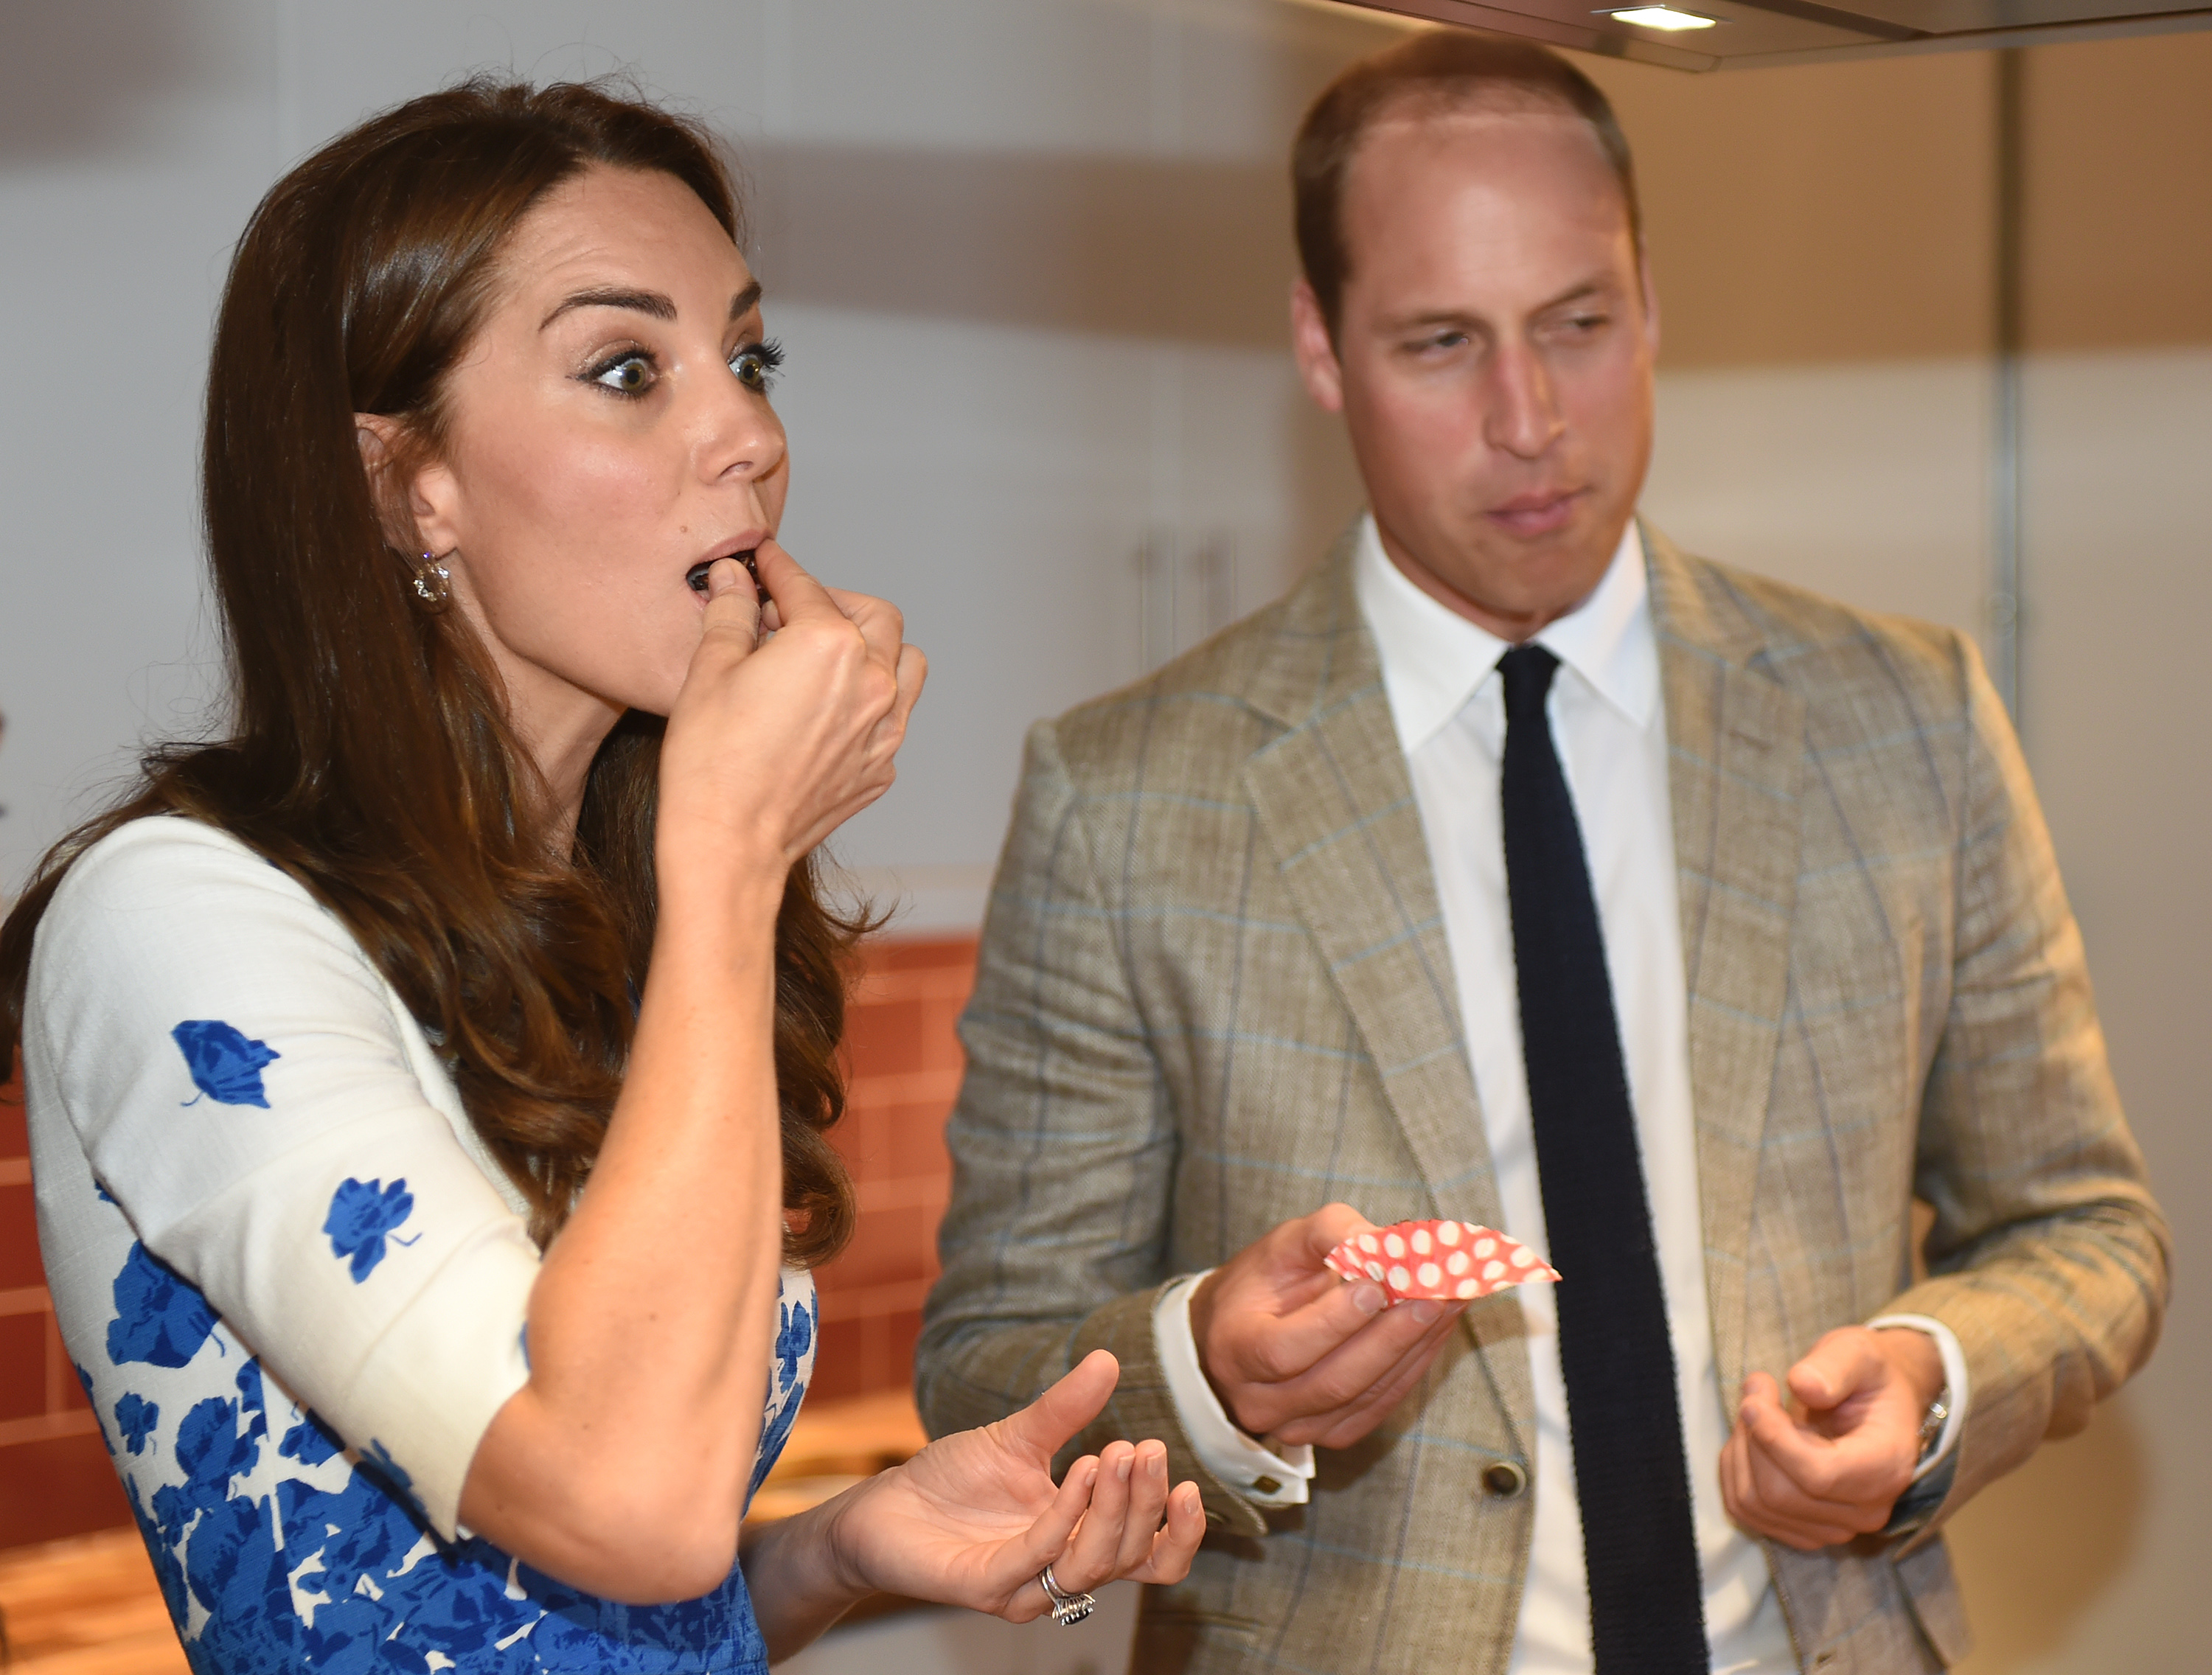 The Duke and Duchess of Cambridge visit Bute Mills, to learn about the work of Youthscape in Luton, Bedfordshire, UK, on the 24th August 2016. Picture by Eddie Mulholland/WPA-Pool Pictured: Duchess of Cambridge, Catherine, Kate Middleton, Prince William, Duke of Cambridge Ref: SPL1339916 240816 Picture by: Splash News Splash News and Pictures Los Angeles:310-821-2666 New York: 212-619-2666 London: 870-934-2666 photodesk@splashnews.com 